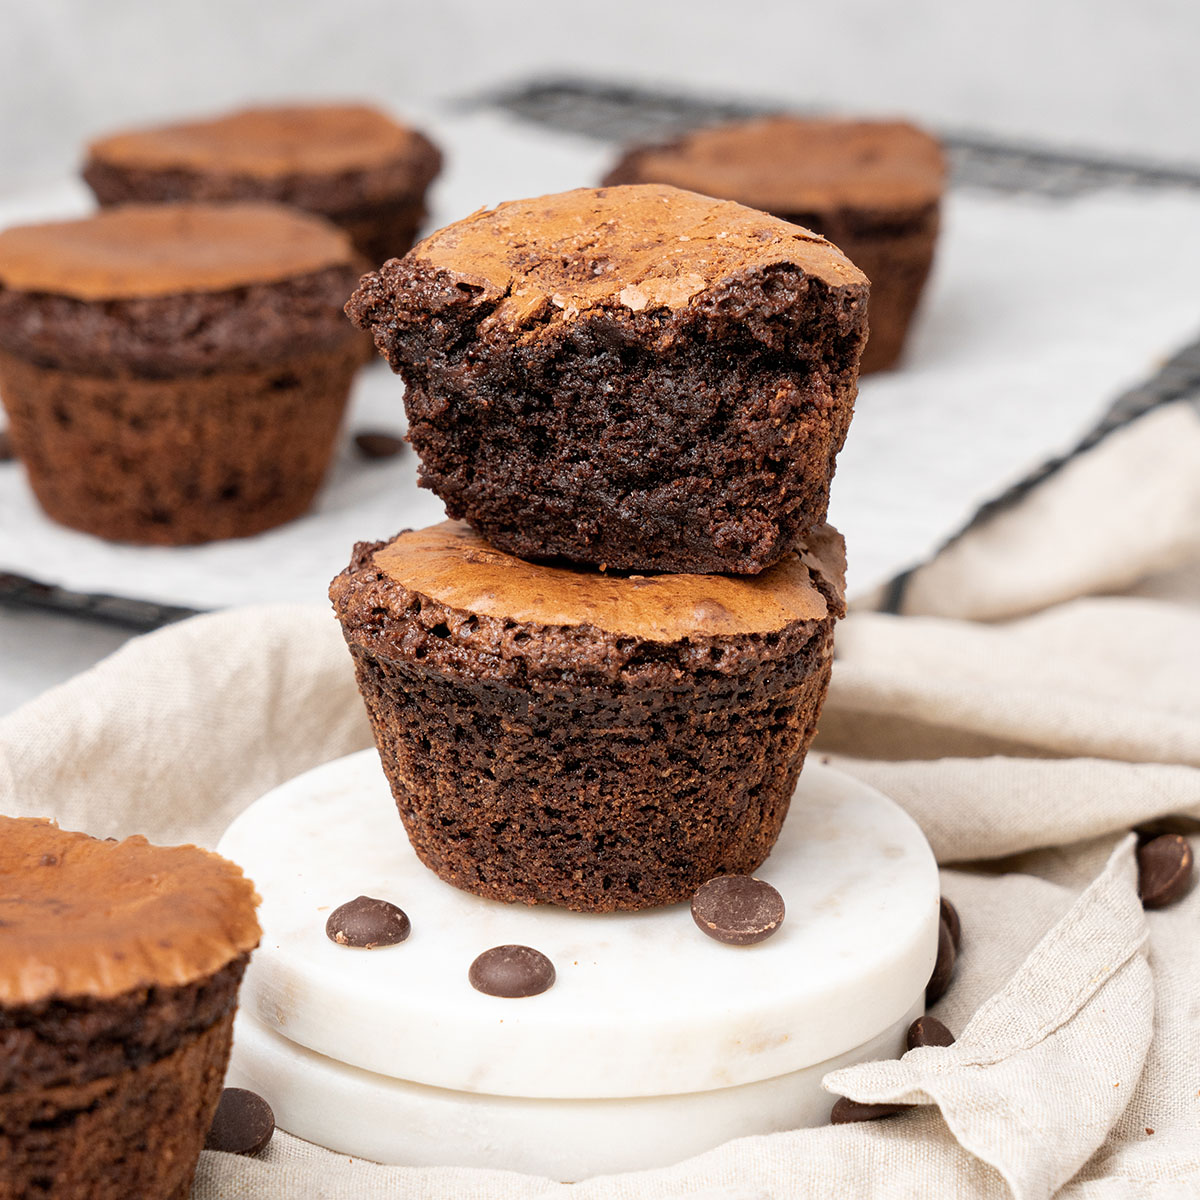 <p><strong>Go to the recipe: <a href="https://www.spatuladesserts.com/brownie-muffins/">Brownie Muffins</a></strong></p>